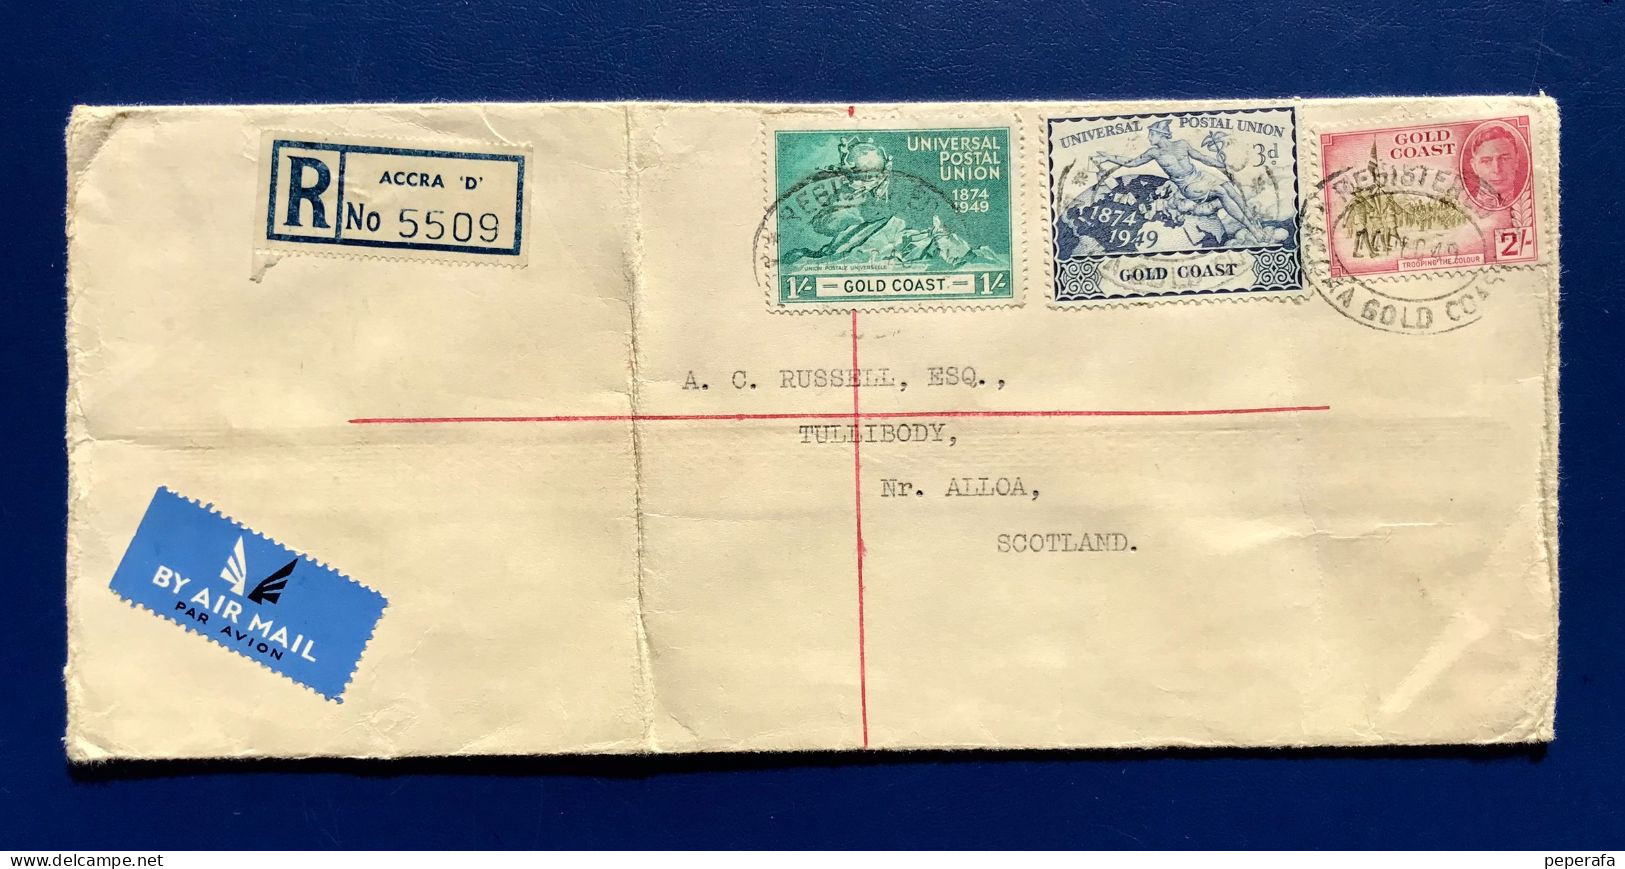 GOLD COAST 1949, REGISTER COVER WITH STAMPS U.P.U. COMMEMORATIVE UNION POSTAL UNIVERSAL - Used Stamps